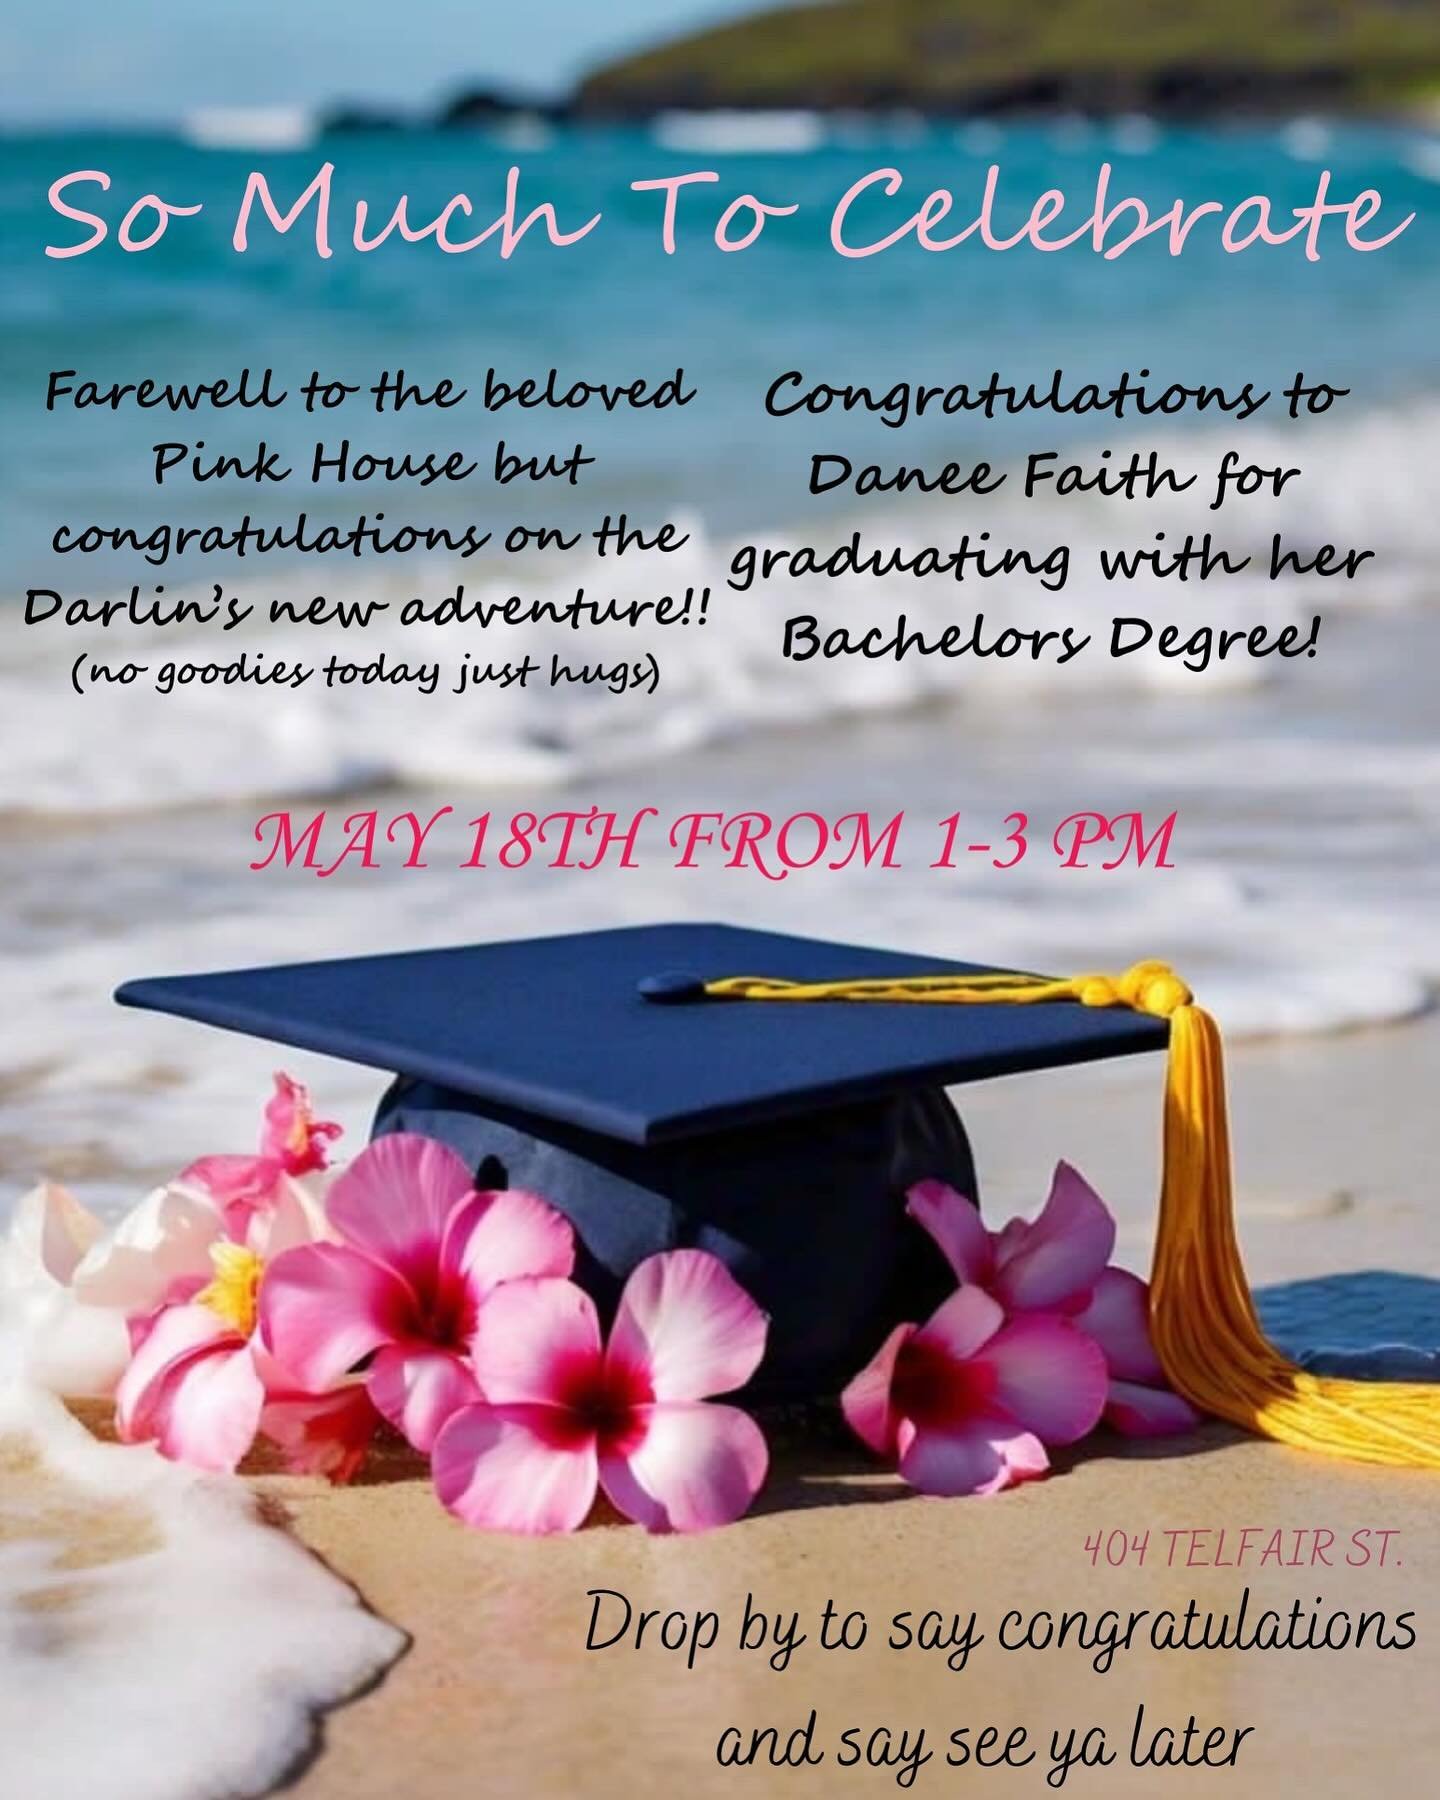 (Read ALL the details, please!) There is sadness in the air around here but also so much to celebrate! Of course, we can&rsquo;t have a proper celebration for Big D&rsquo;s HUGE accomplishment of her college graduation and our own PinkHouse farewell 